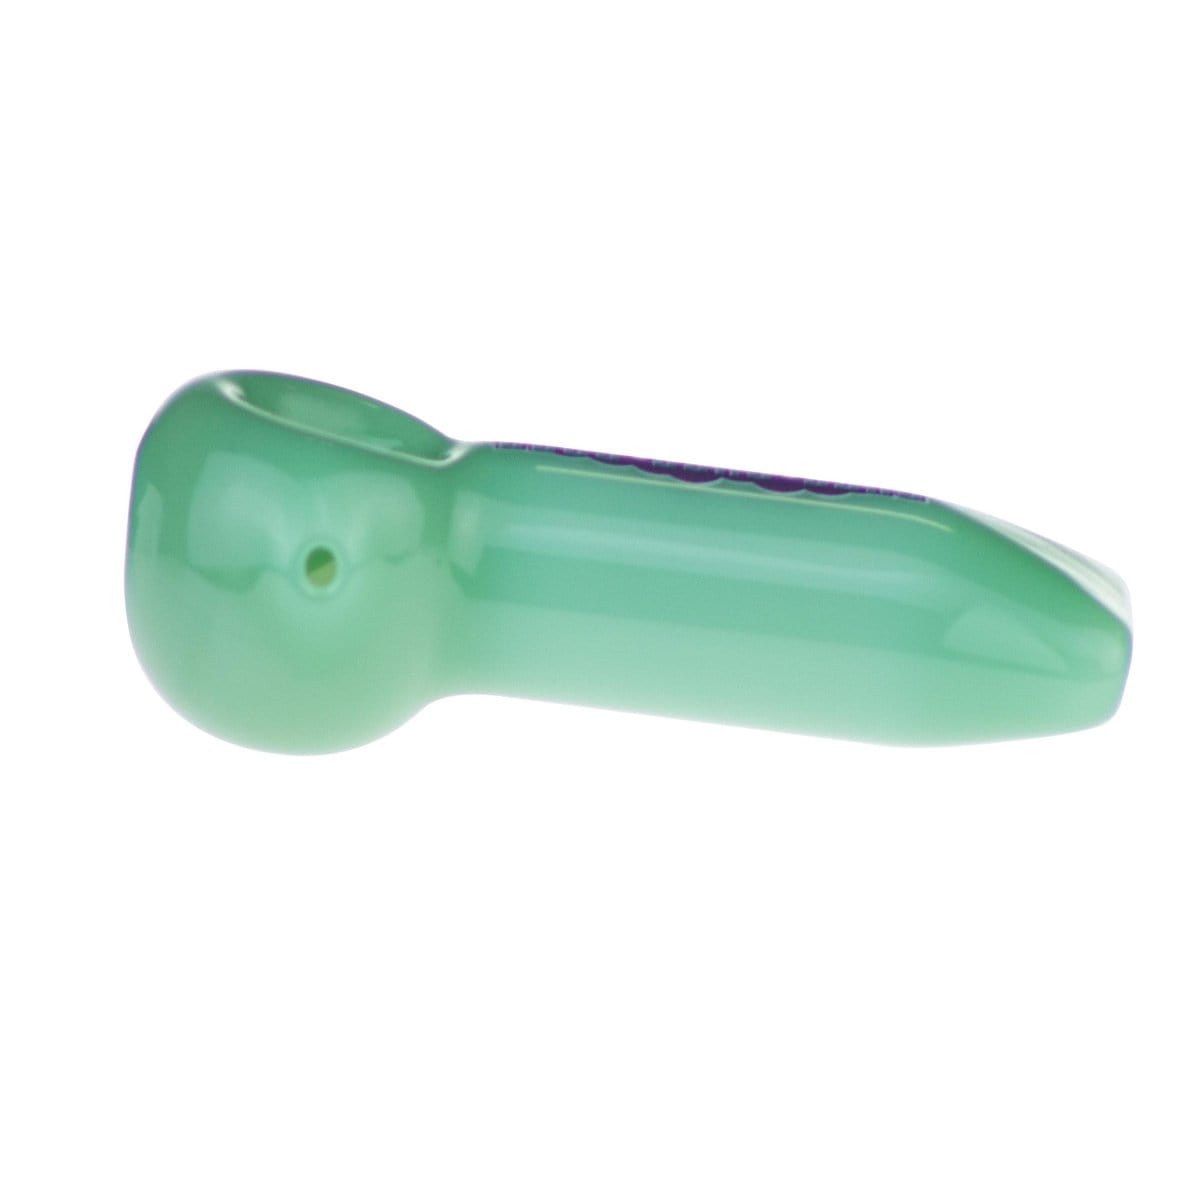 Puff Puff Pass Hand Pipe 4" Spoon Pipe